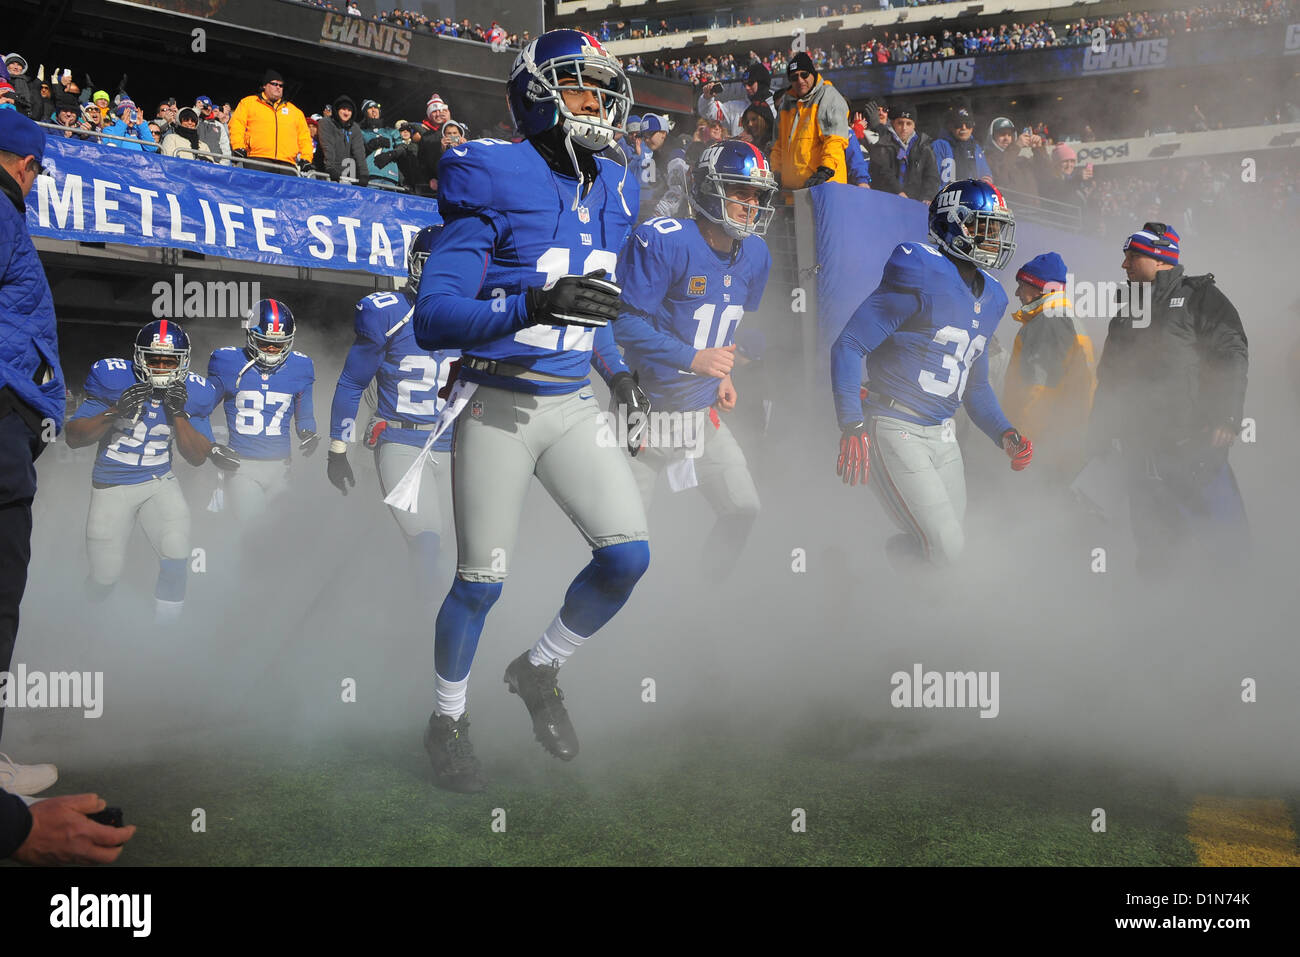 New Jersey, USA. 30 December 2012: New York Giants take the field during a week 17 NFL matchup between the Philadelphia Eagles and New York Giants at MetLife Stadium in East Rutherford, New Jersey. Stock Photo